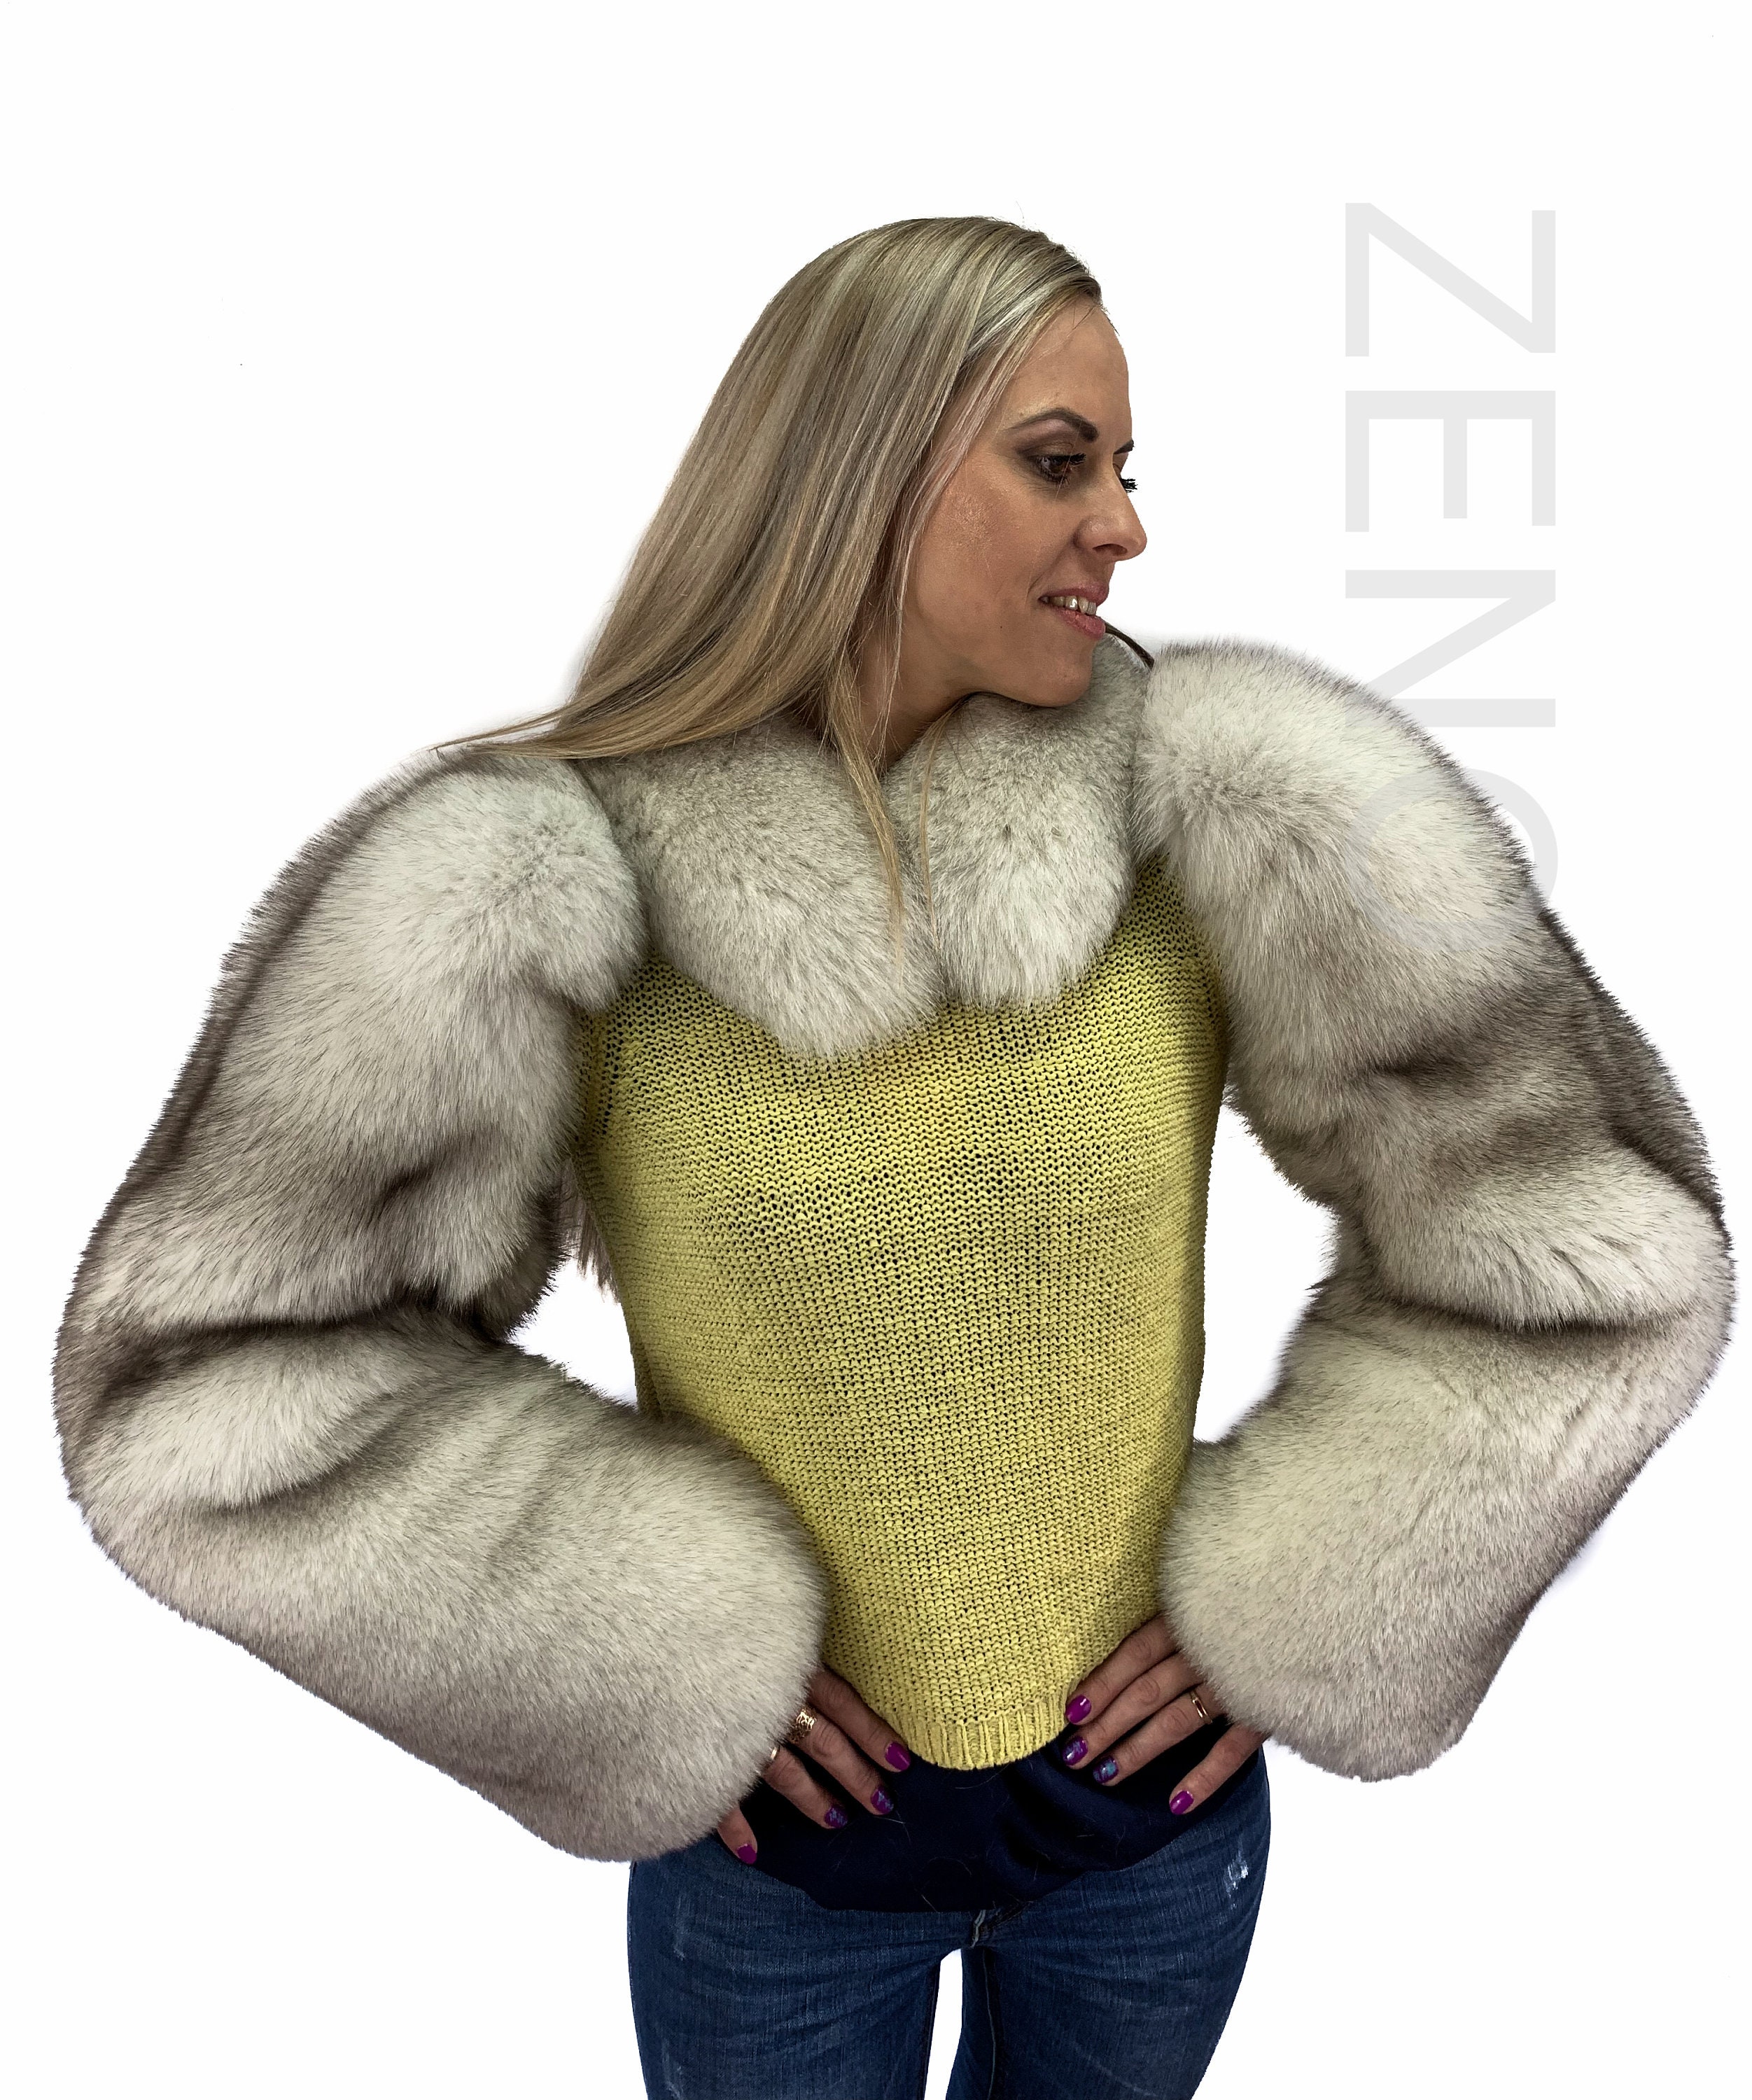 Natural White Fox Fur Huge Arm Sleeves With Scarf to Keep Them in